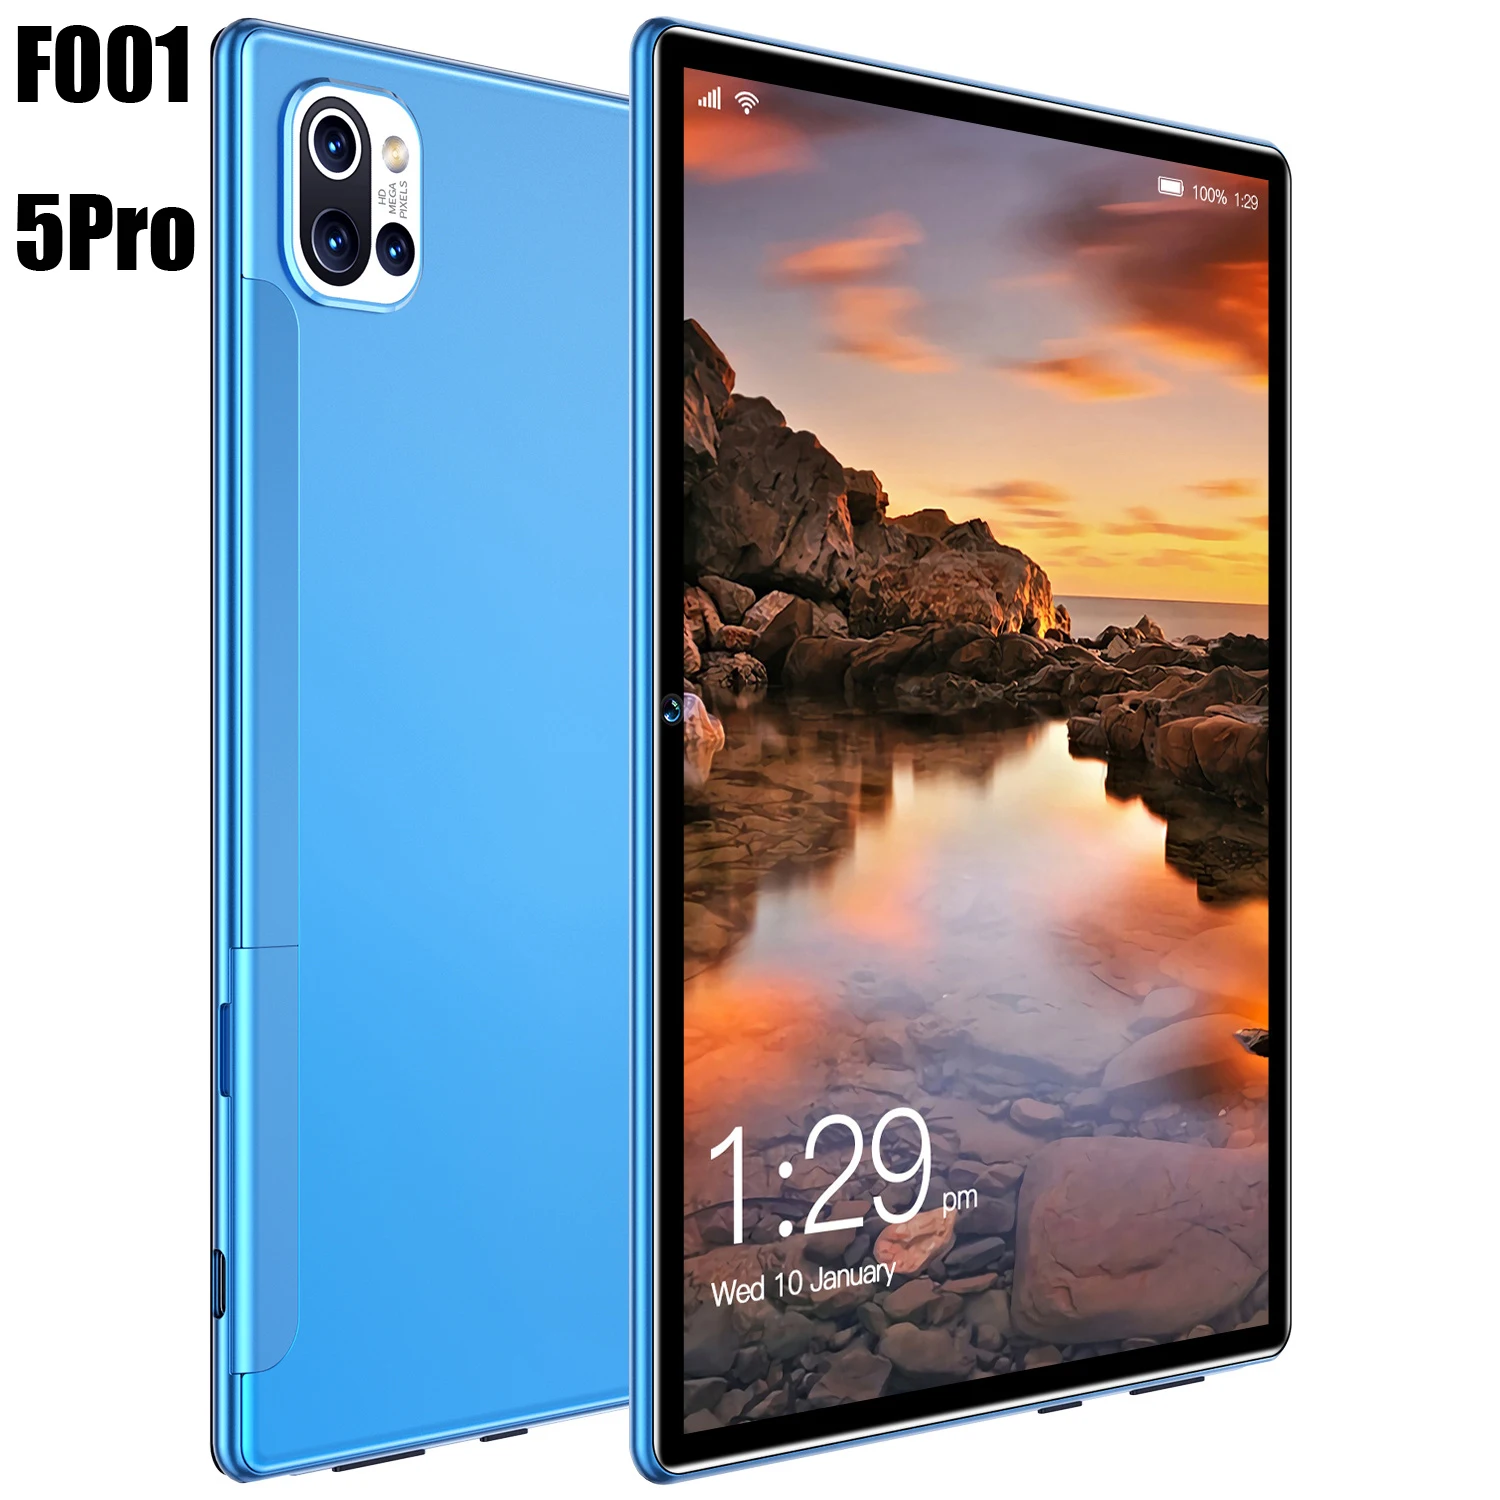 cheap tablets Pad 5 Pro 5G Google Play Tablet PC 12GB 512GB Global Version 8000mAh Dual Sim Face 8.1 Inch 32MP Camera WIFI Keyboard Tablette best writing tablet Tablets